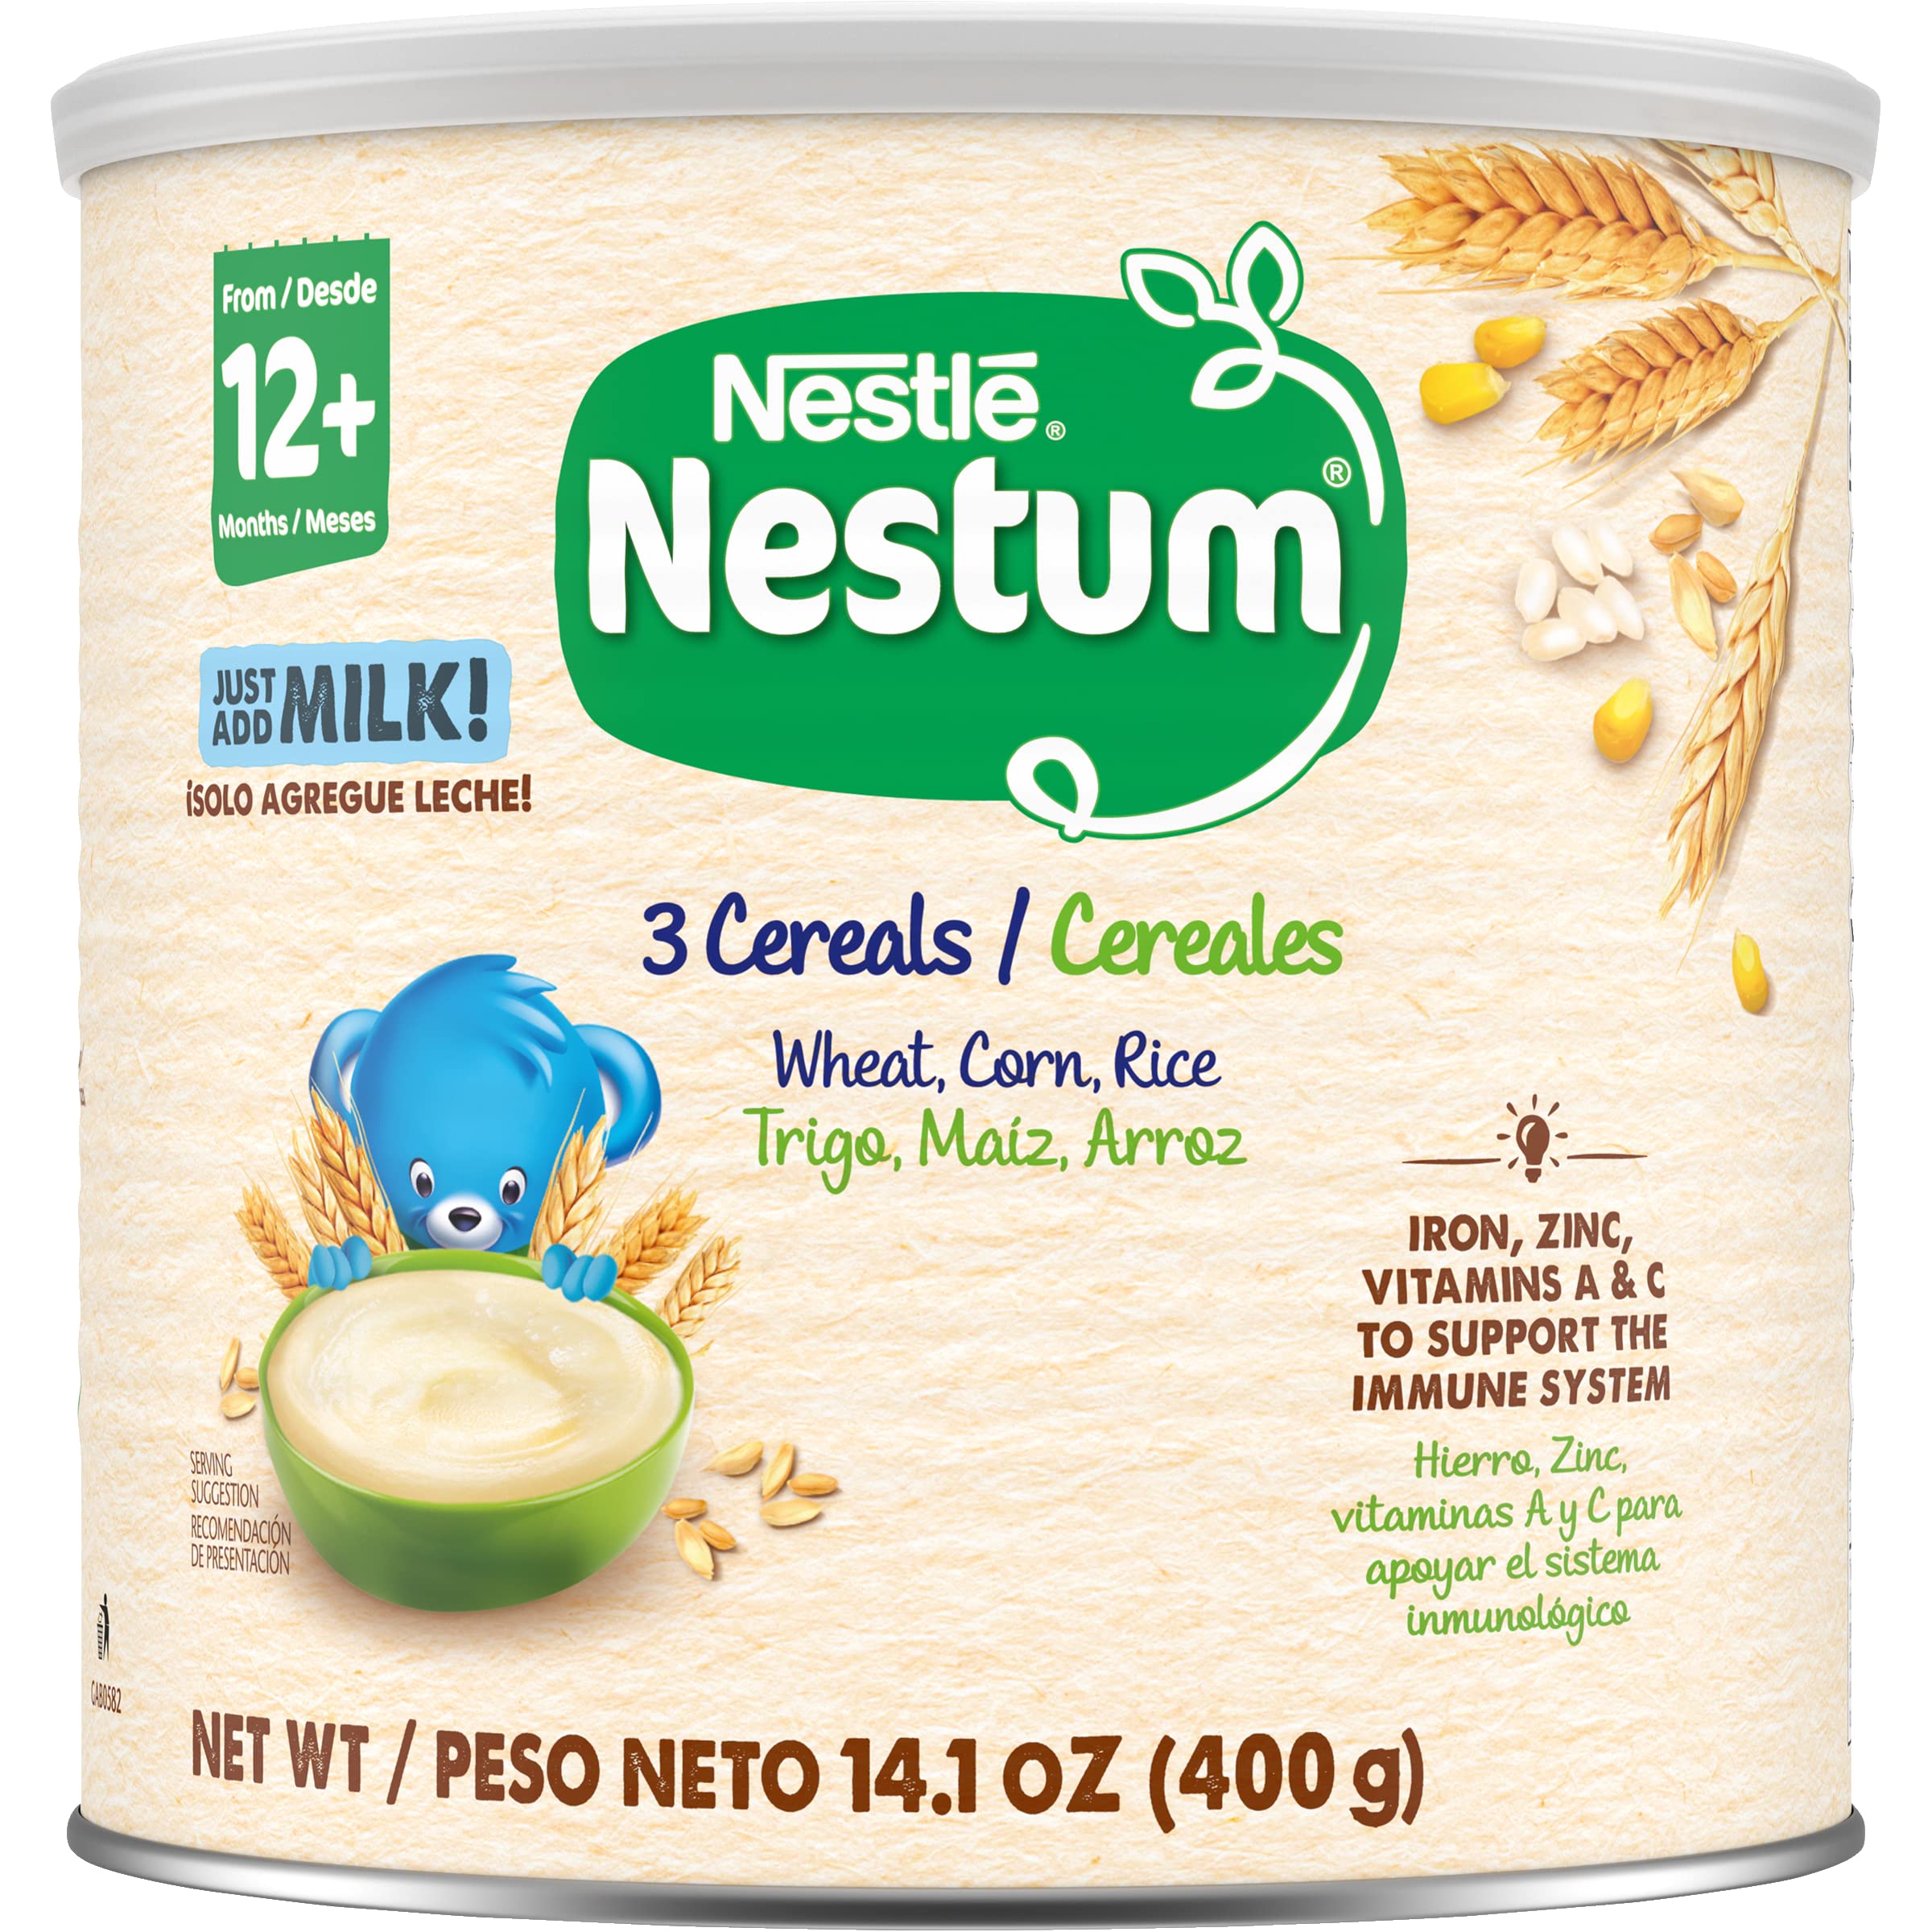 Nestle Nestum Junior Cereal, 3 Cereals - Wheat, Corn & Rice, Made for Toddlers 12 Months, 14.1 OZ Canister (Pack of 1)